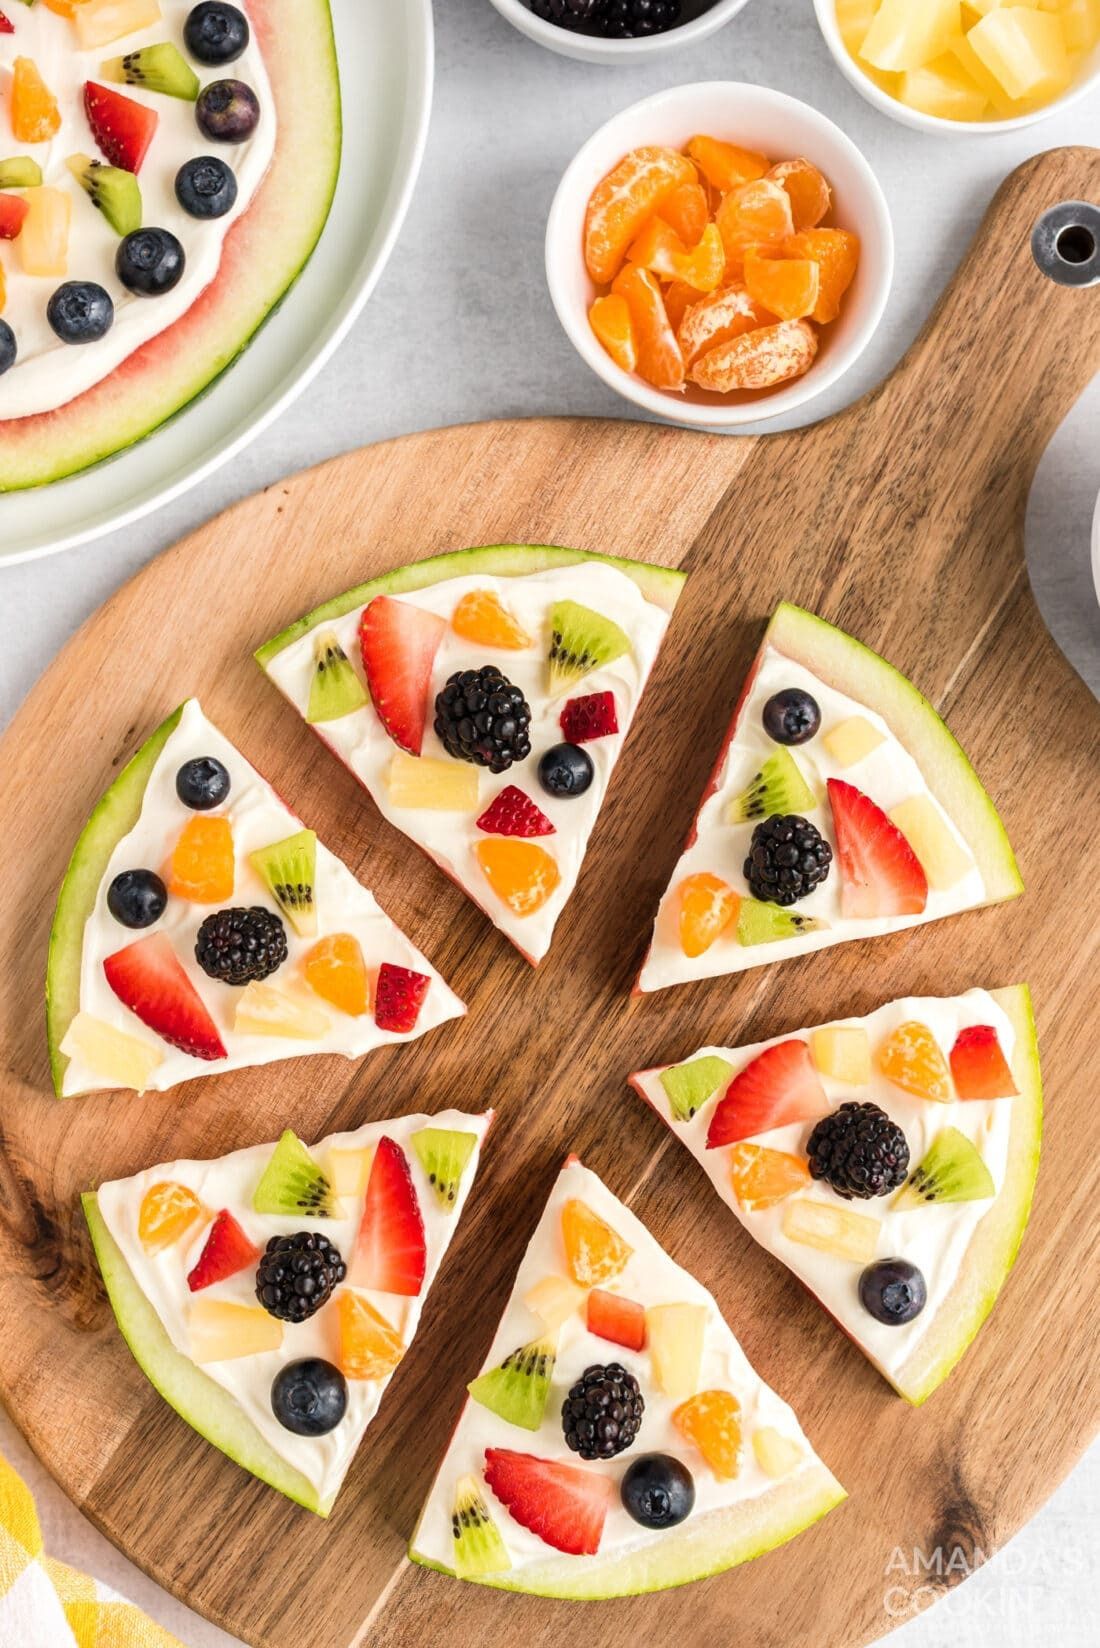 Tasty sweet pizza with berries, marshmallows and candies in